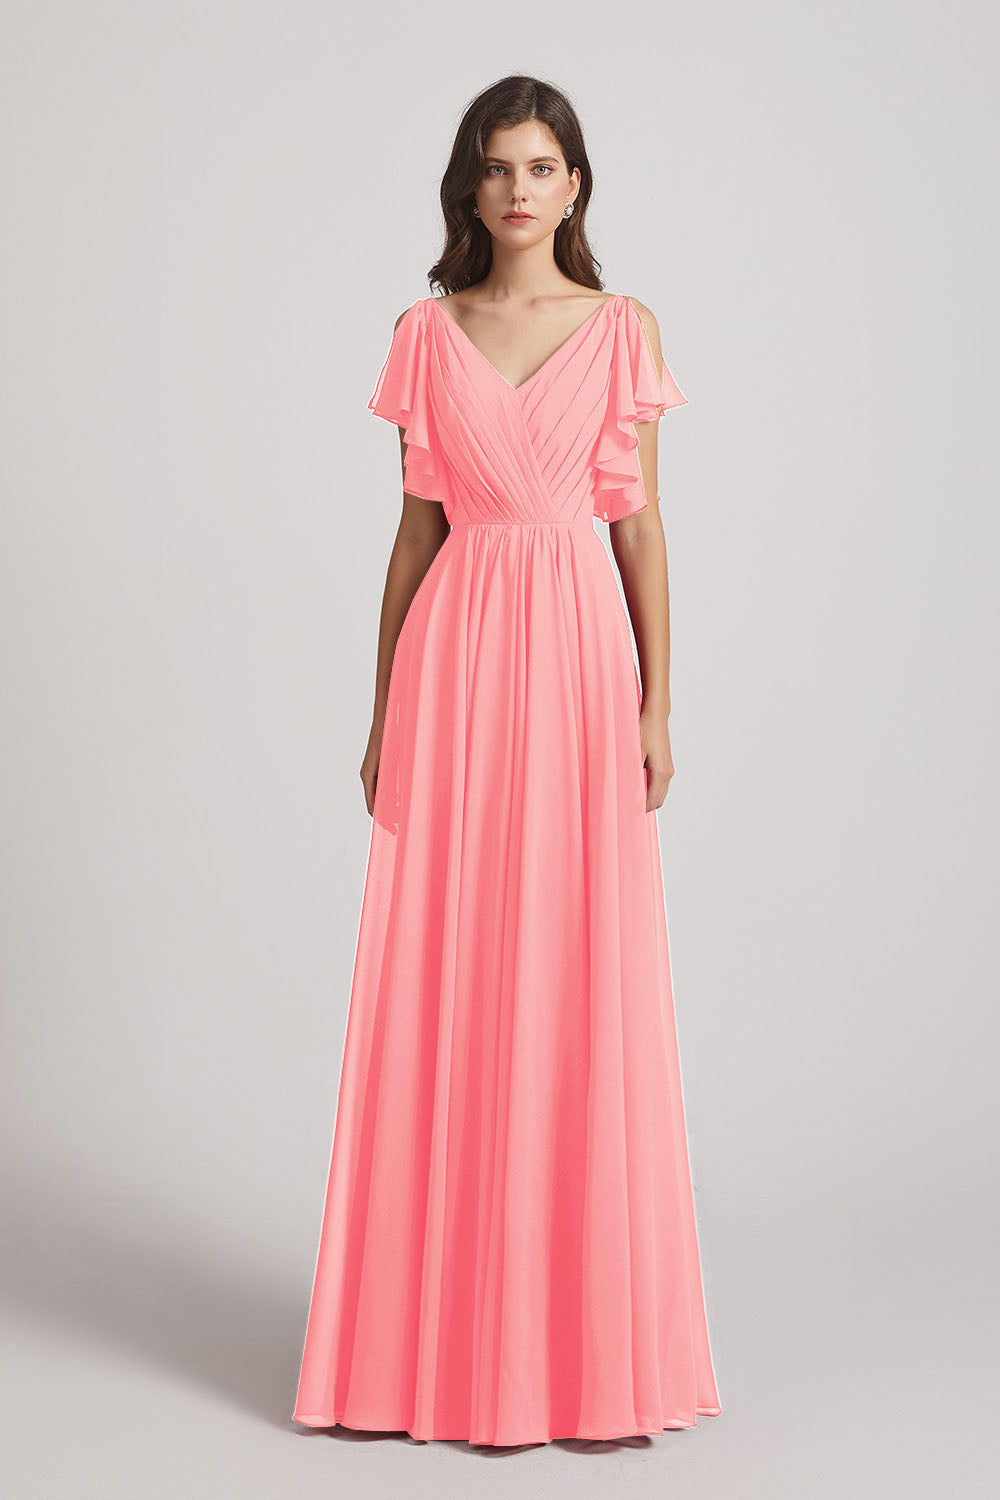 Alfa Bridal Salmon V-Neck Pleated Chiffon Bridesmaid Dresses with Open Flutter Sleeves (AF0098)